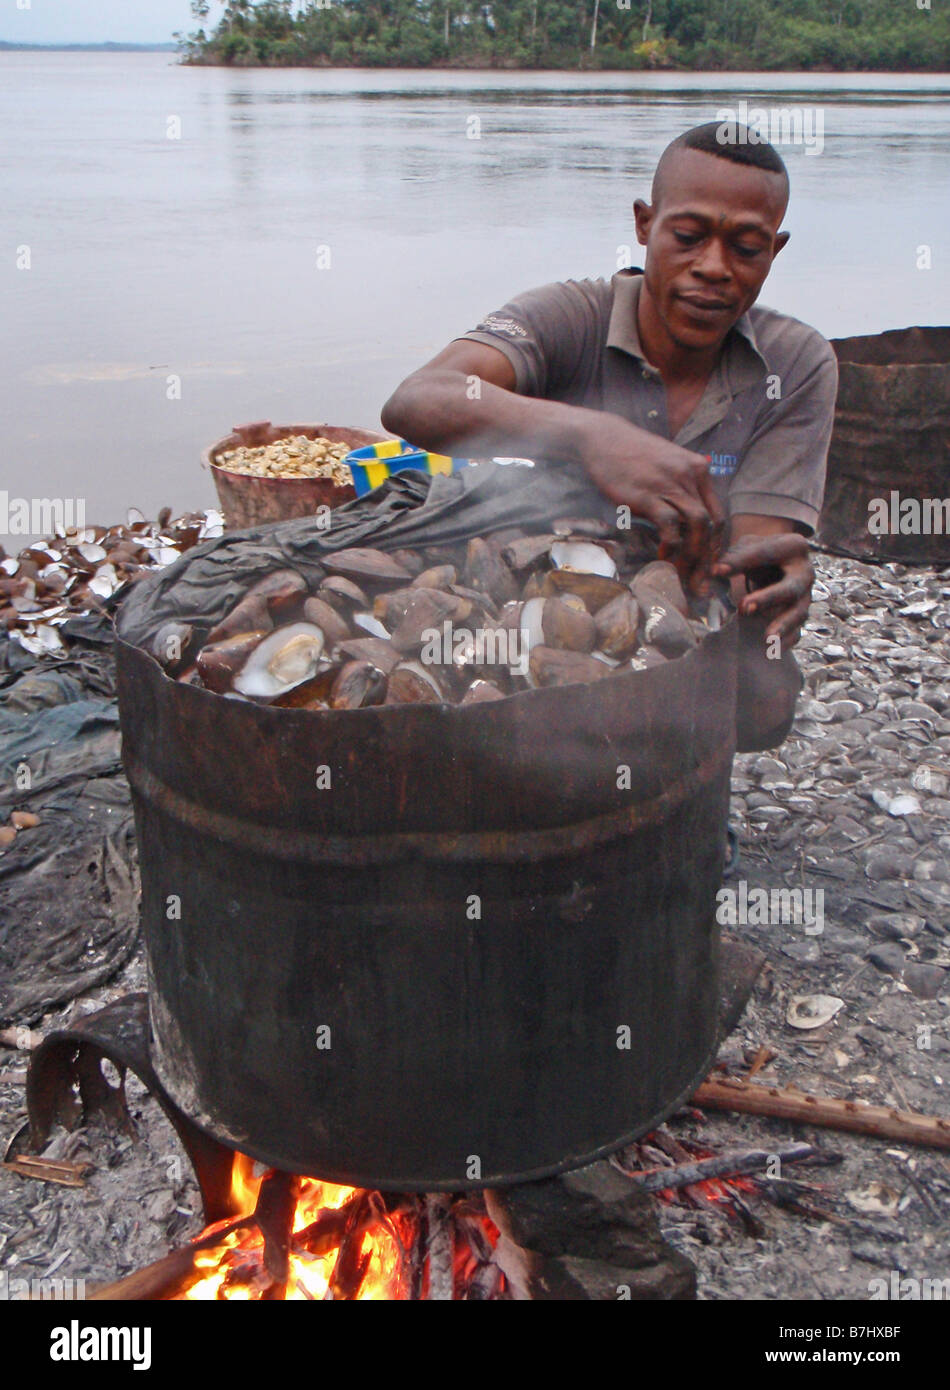 Fisherman boiling clams mussels oysters shell fish in large metal iron drum on banks of River Congo Democratic Republic of Congo Stock Photo